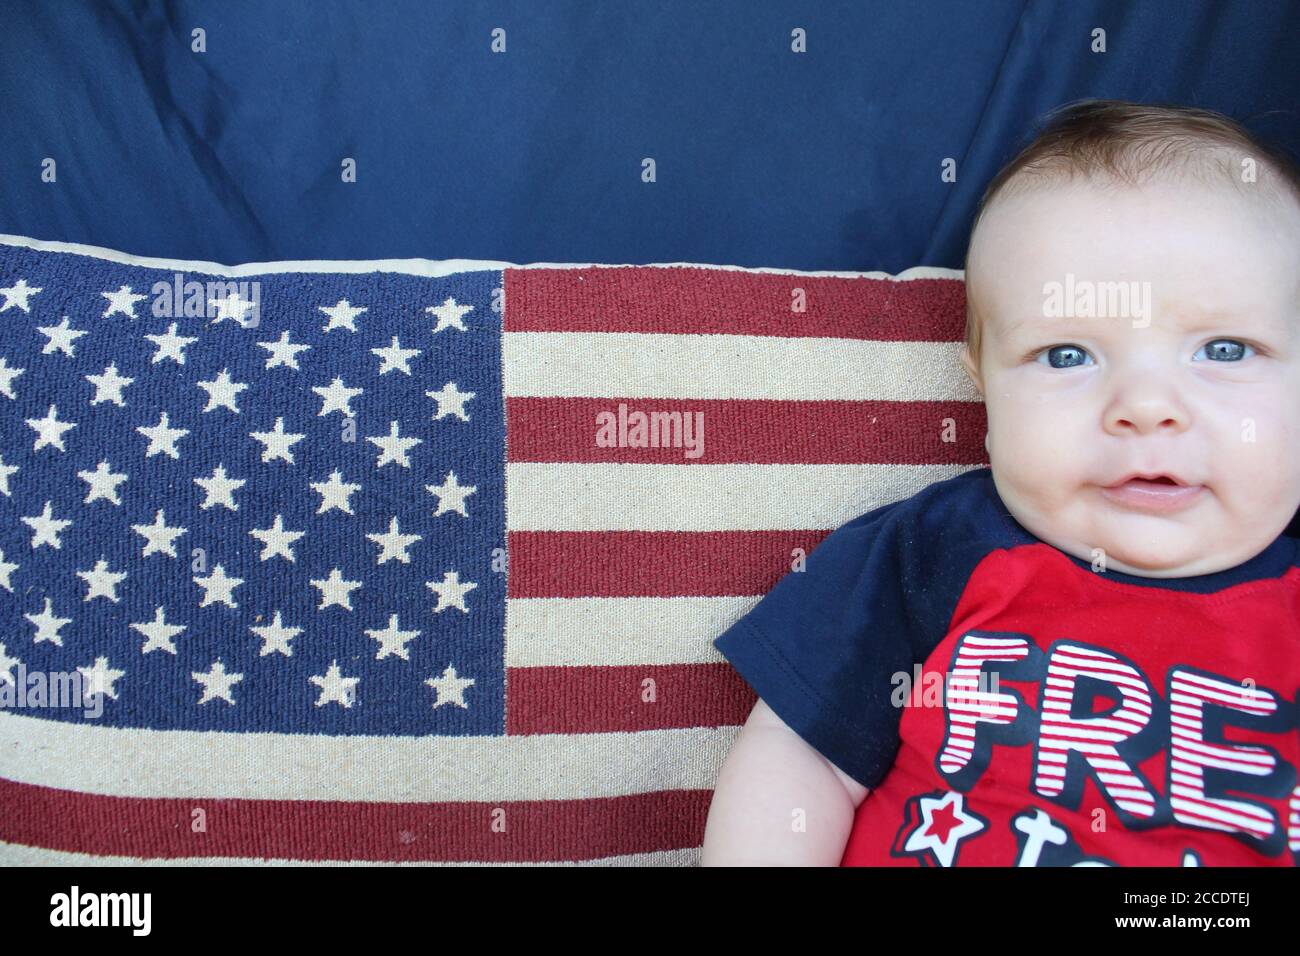 A proud American baby with natural matching colors of the United States of America: Red, White, and Blue. Stock Photo